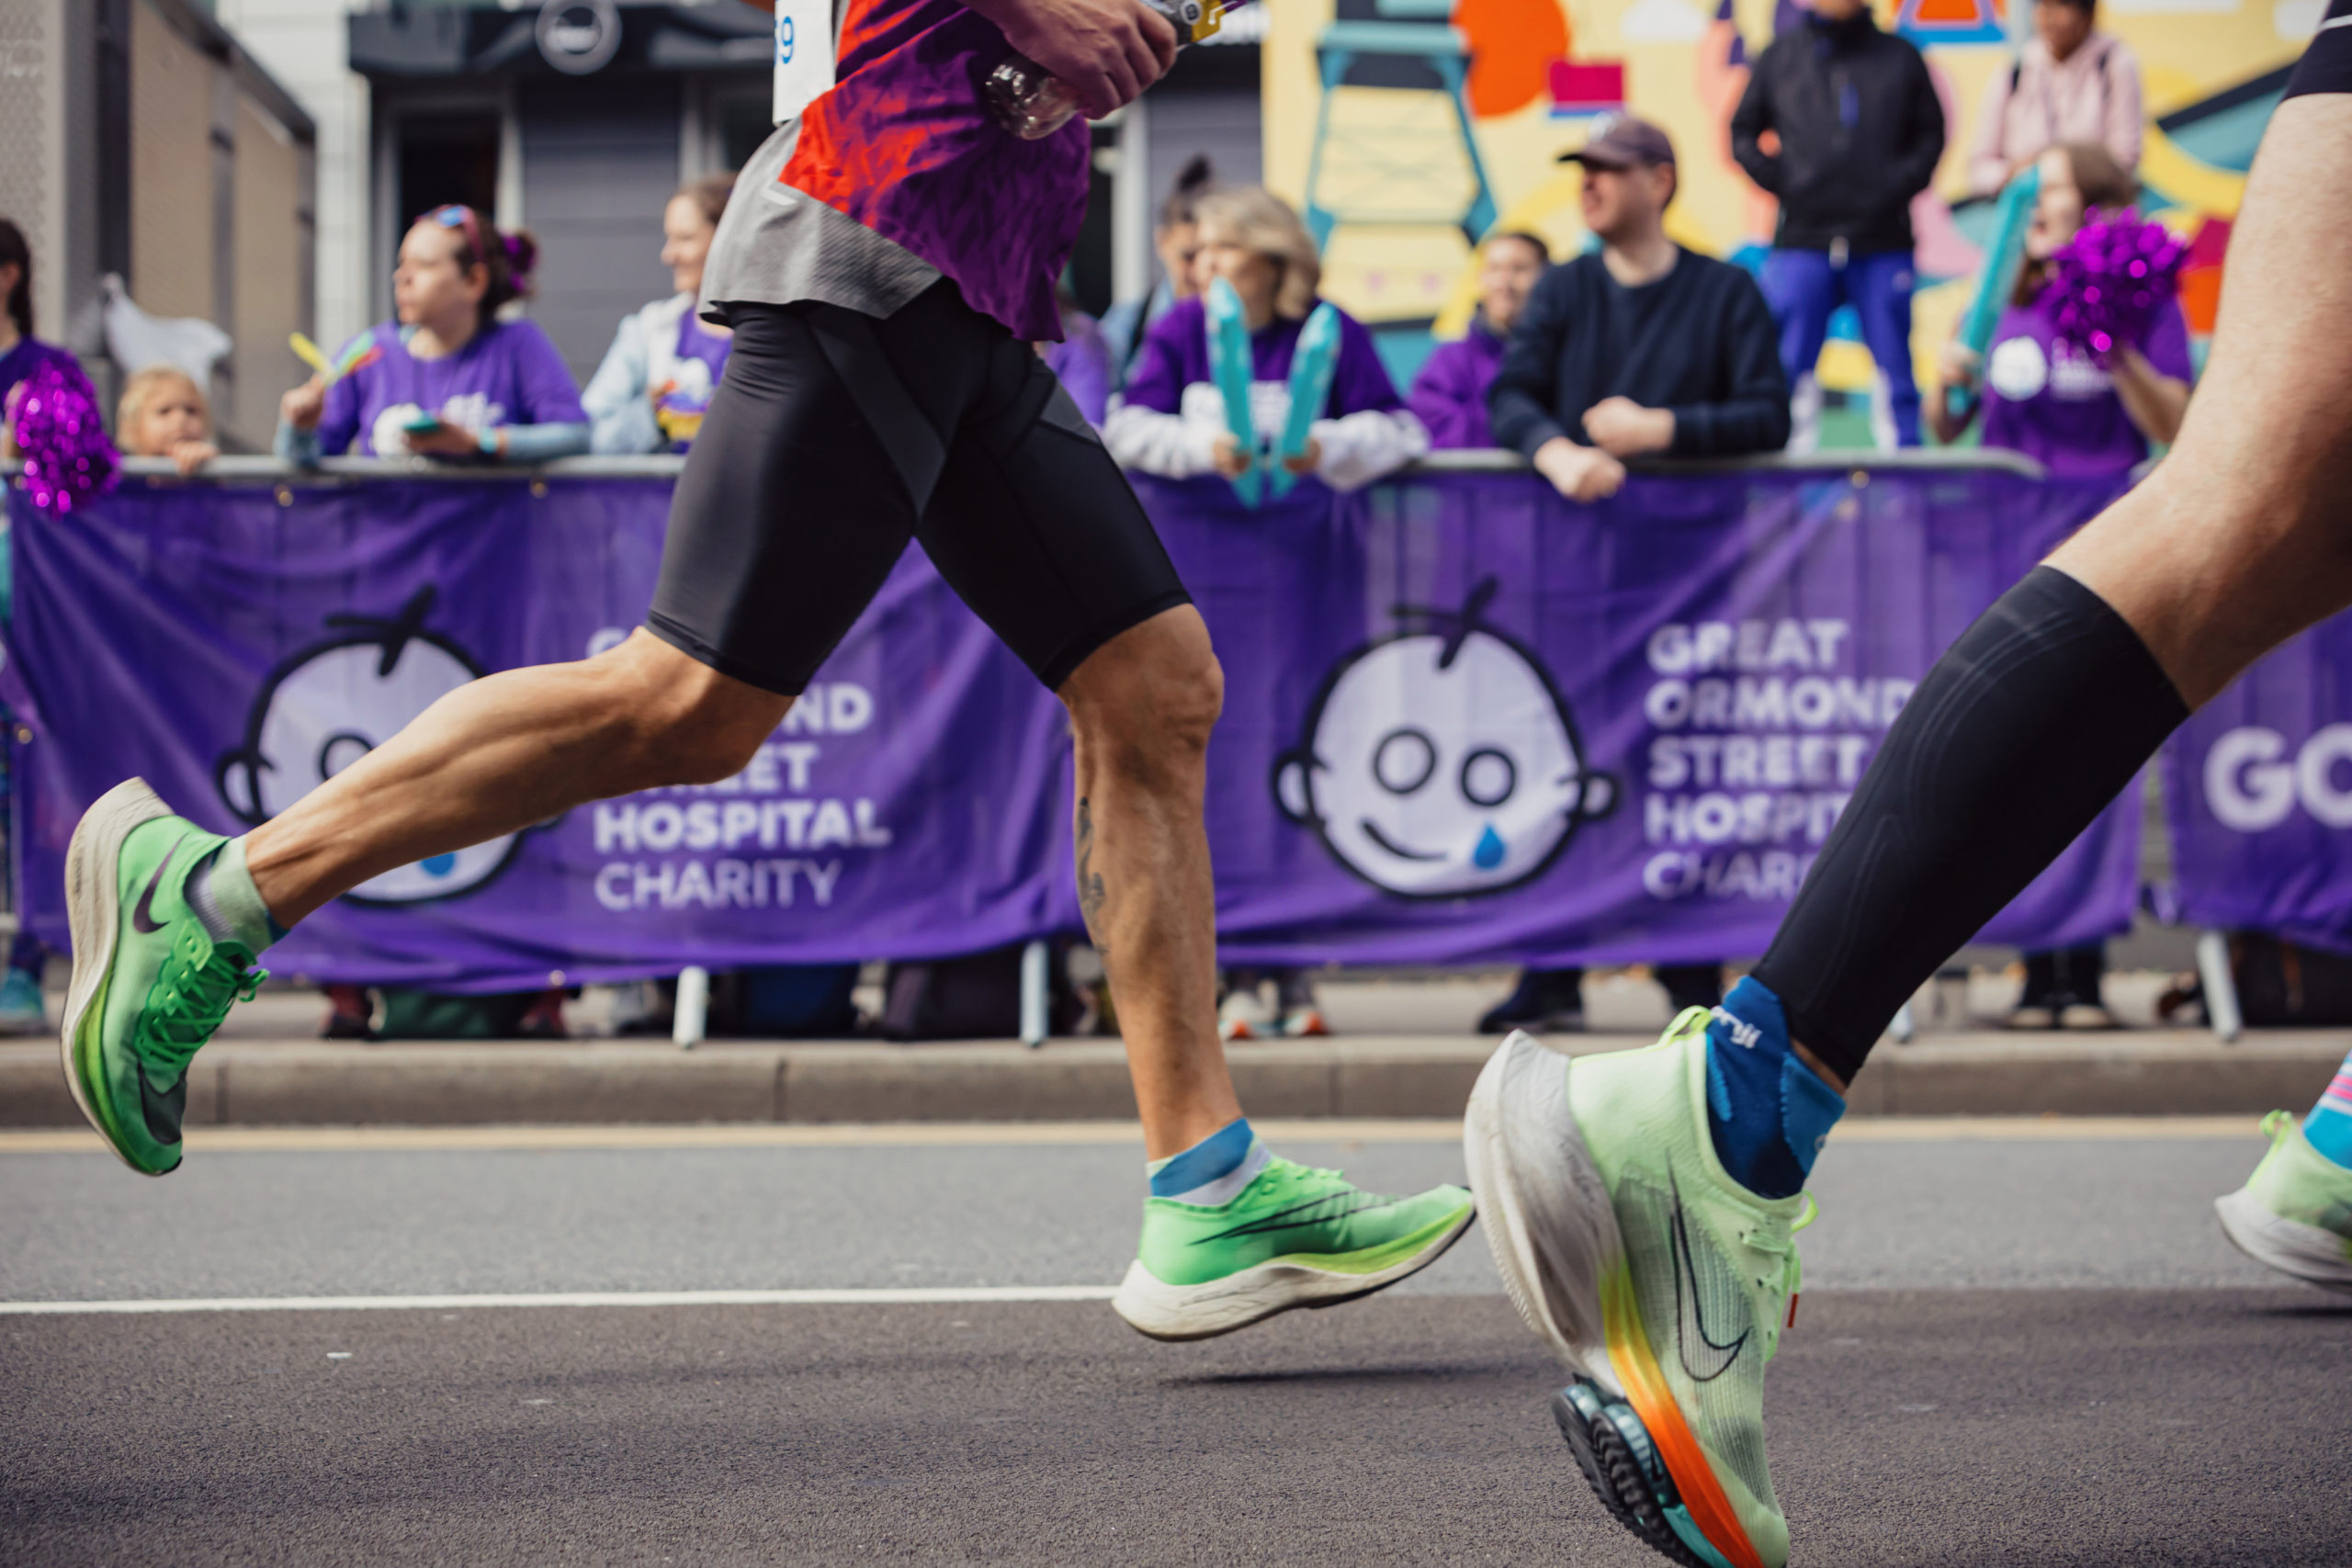 A photo of a GOSH Charity runner